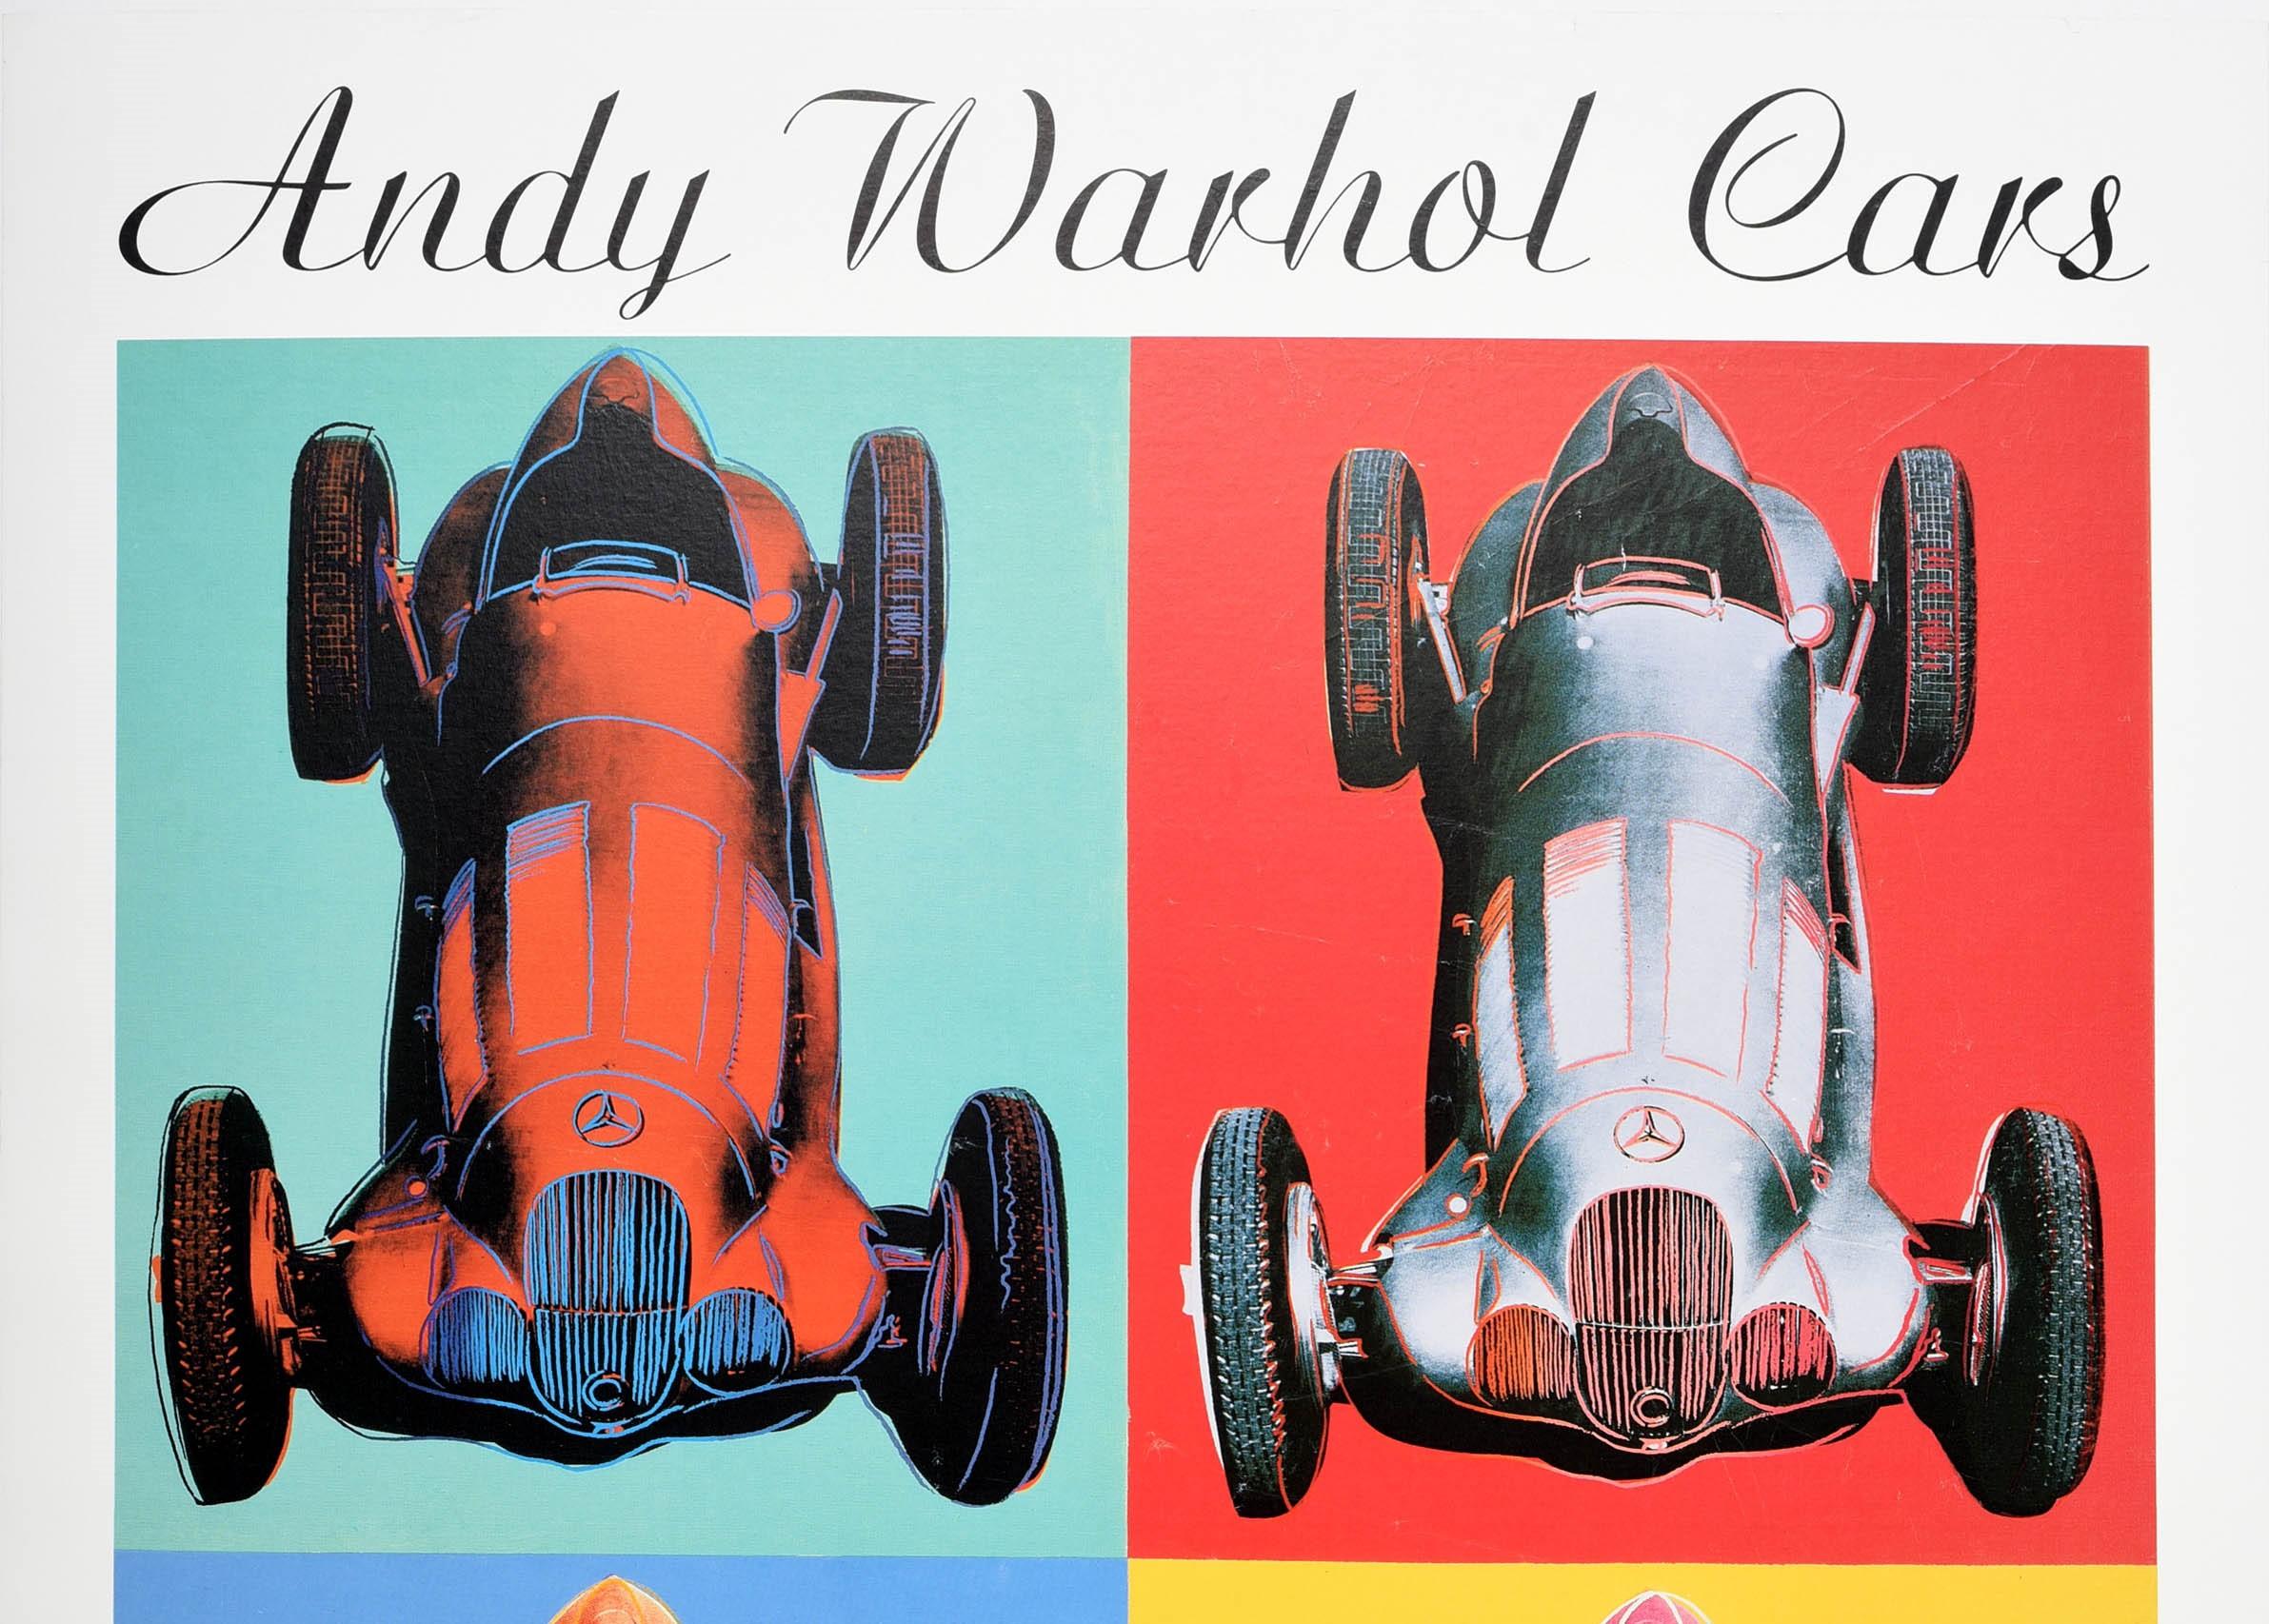 Original vintage advertising poster for an exhibition of Andy Warhol Cars at the Kunstmuseum in Bern from 2 March to 29 April 1990. Colourful image featuring four Mercedes Benz racing cars on green, red, blue and yellow backgrounds by the notable